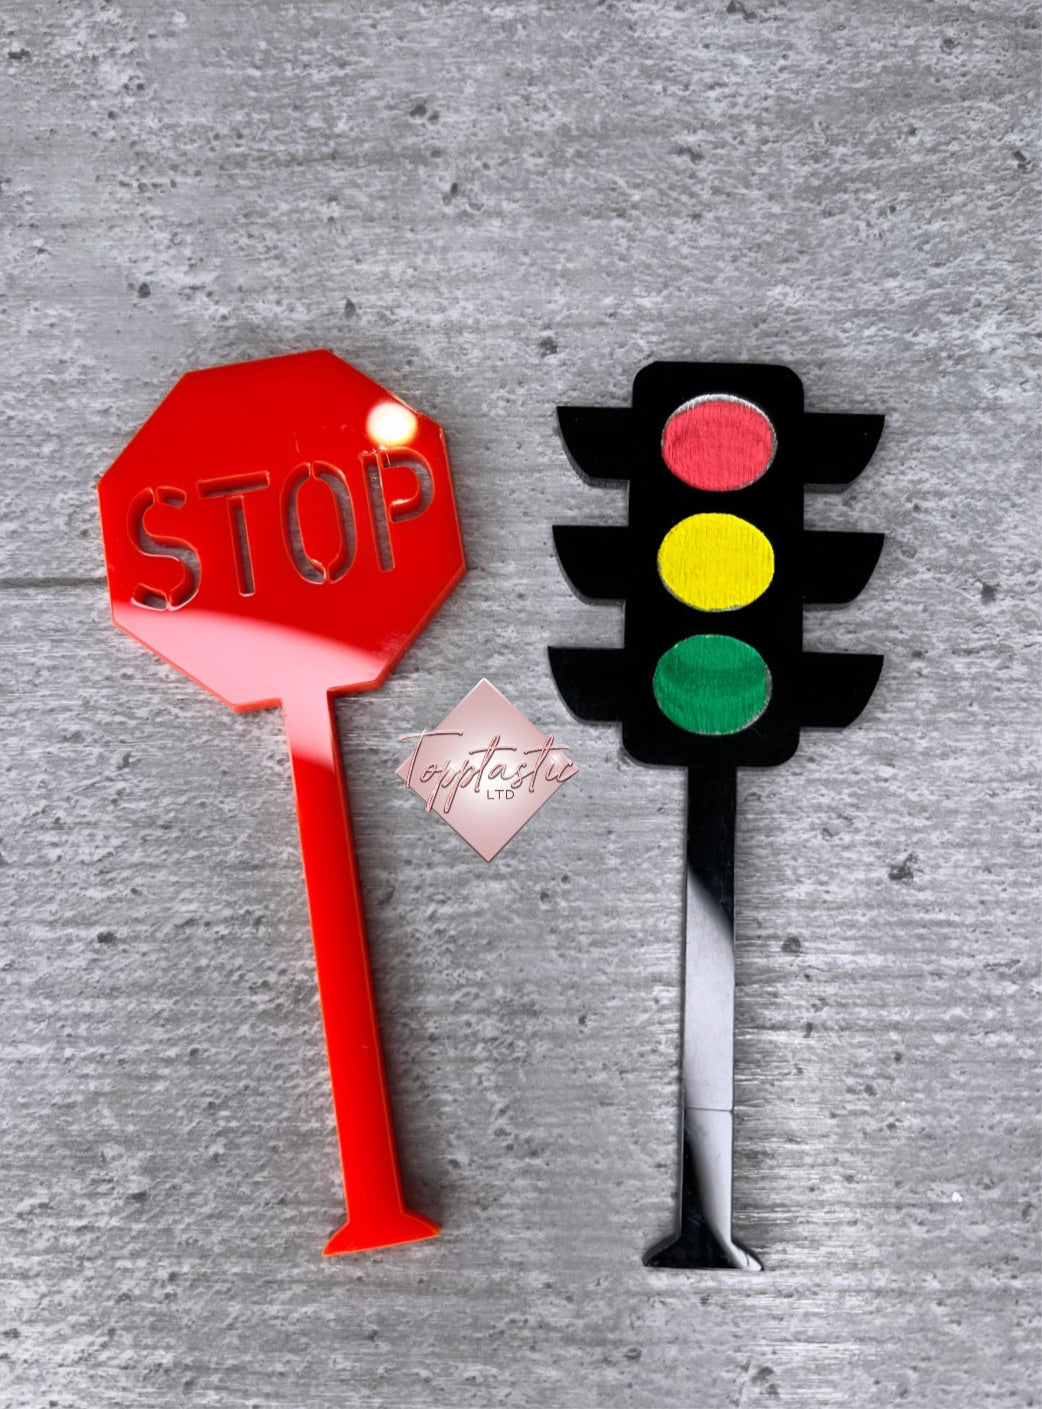 Traffic light/ Stop sign charms